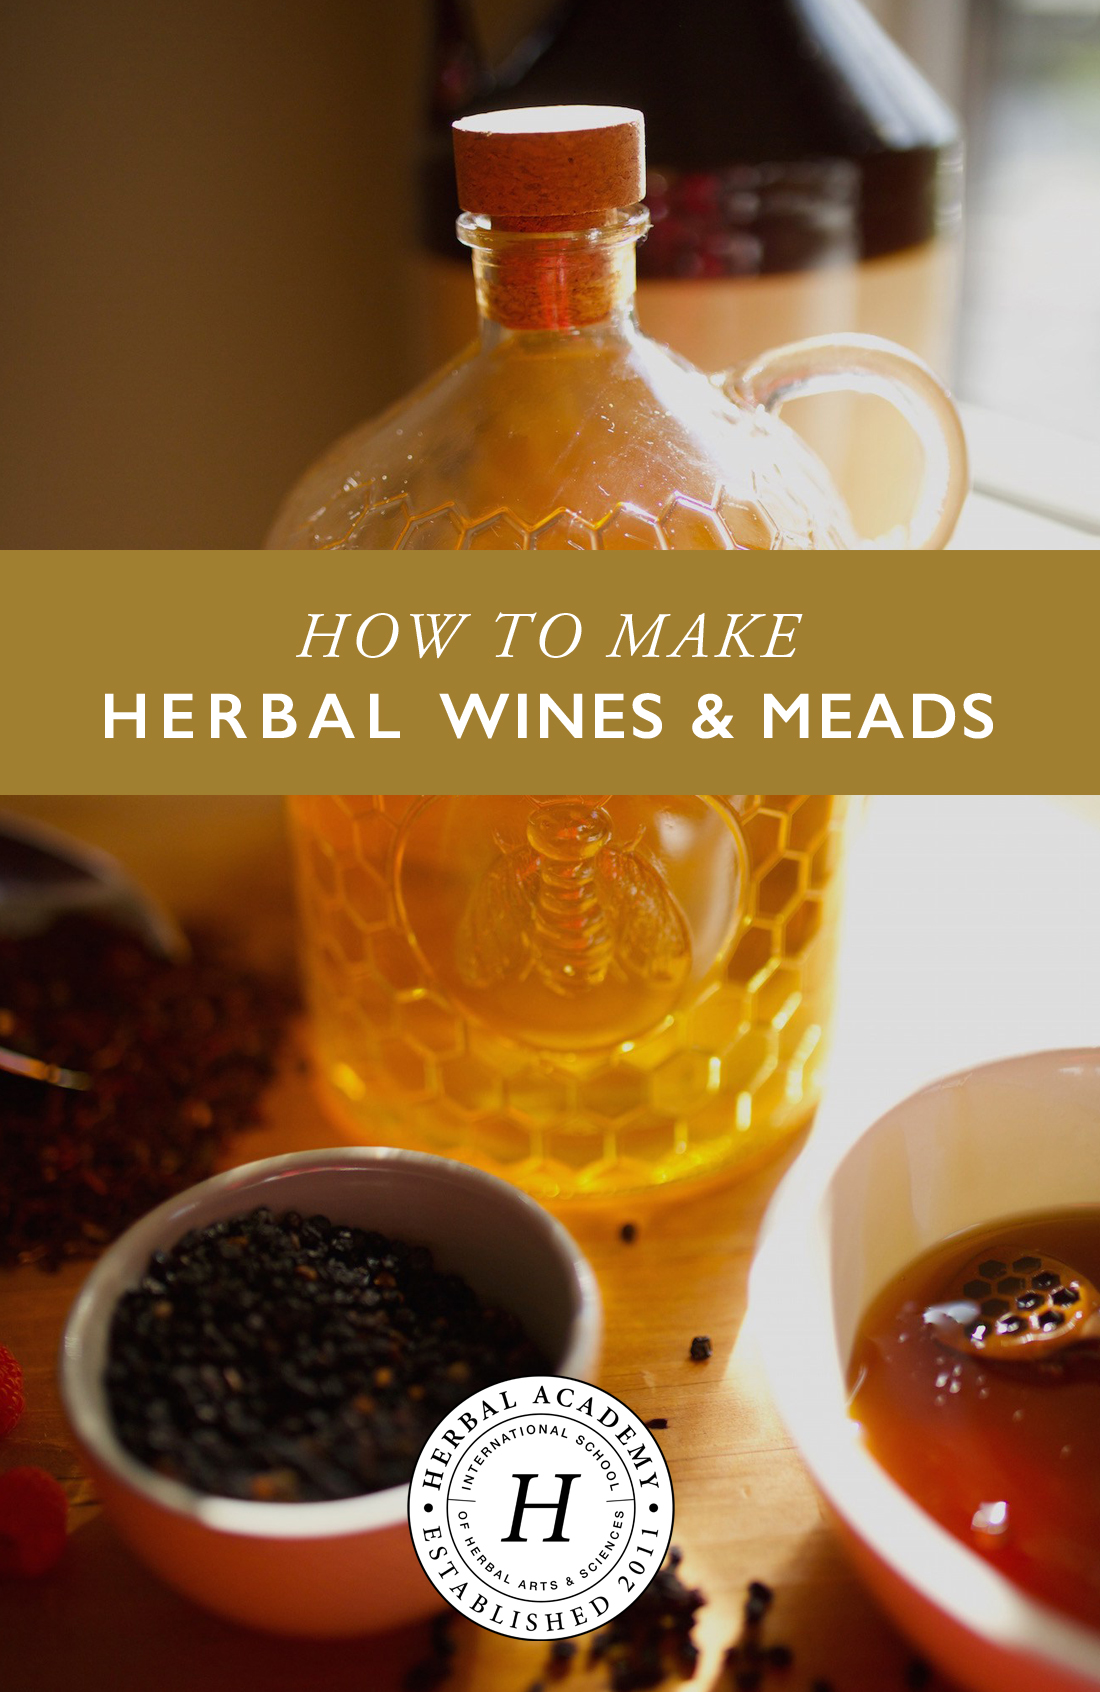 How To Make Herbal Homemade Wines and Meads | Herbal Academy | Homemade herbal wines and meades have been around for centuries. Learn how to make them in your own kitchen!